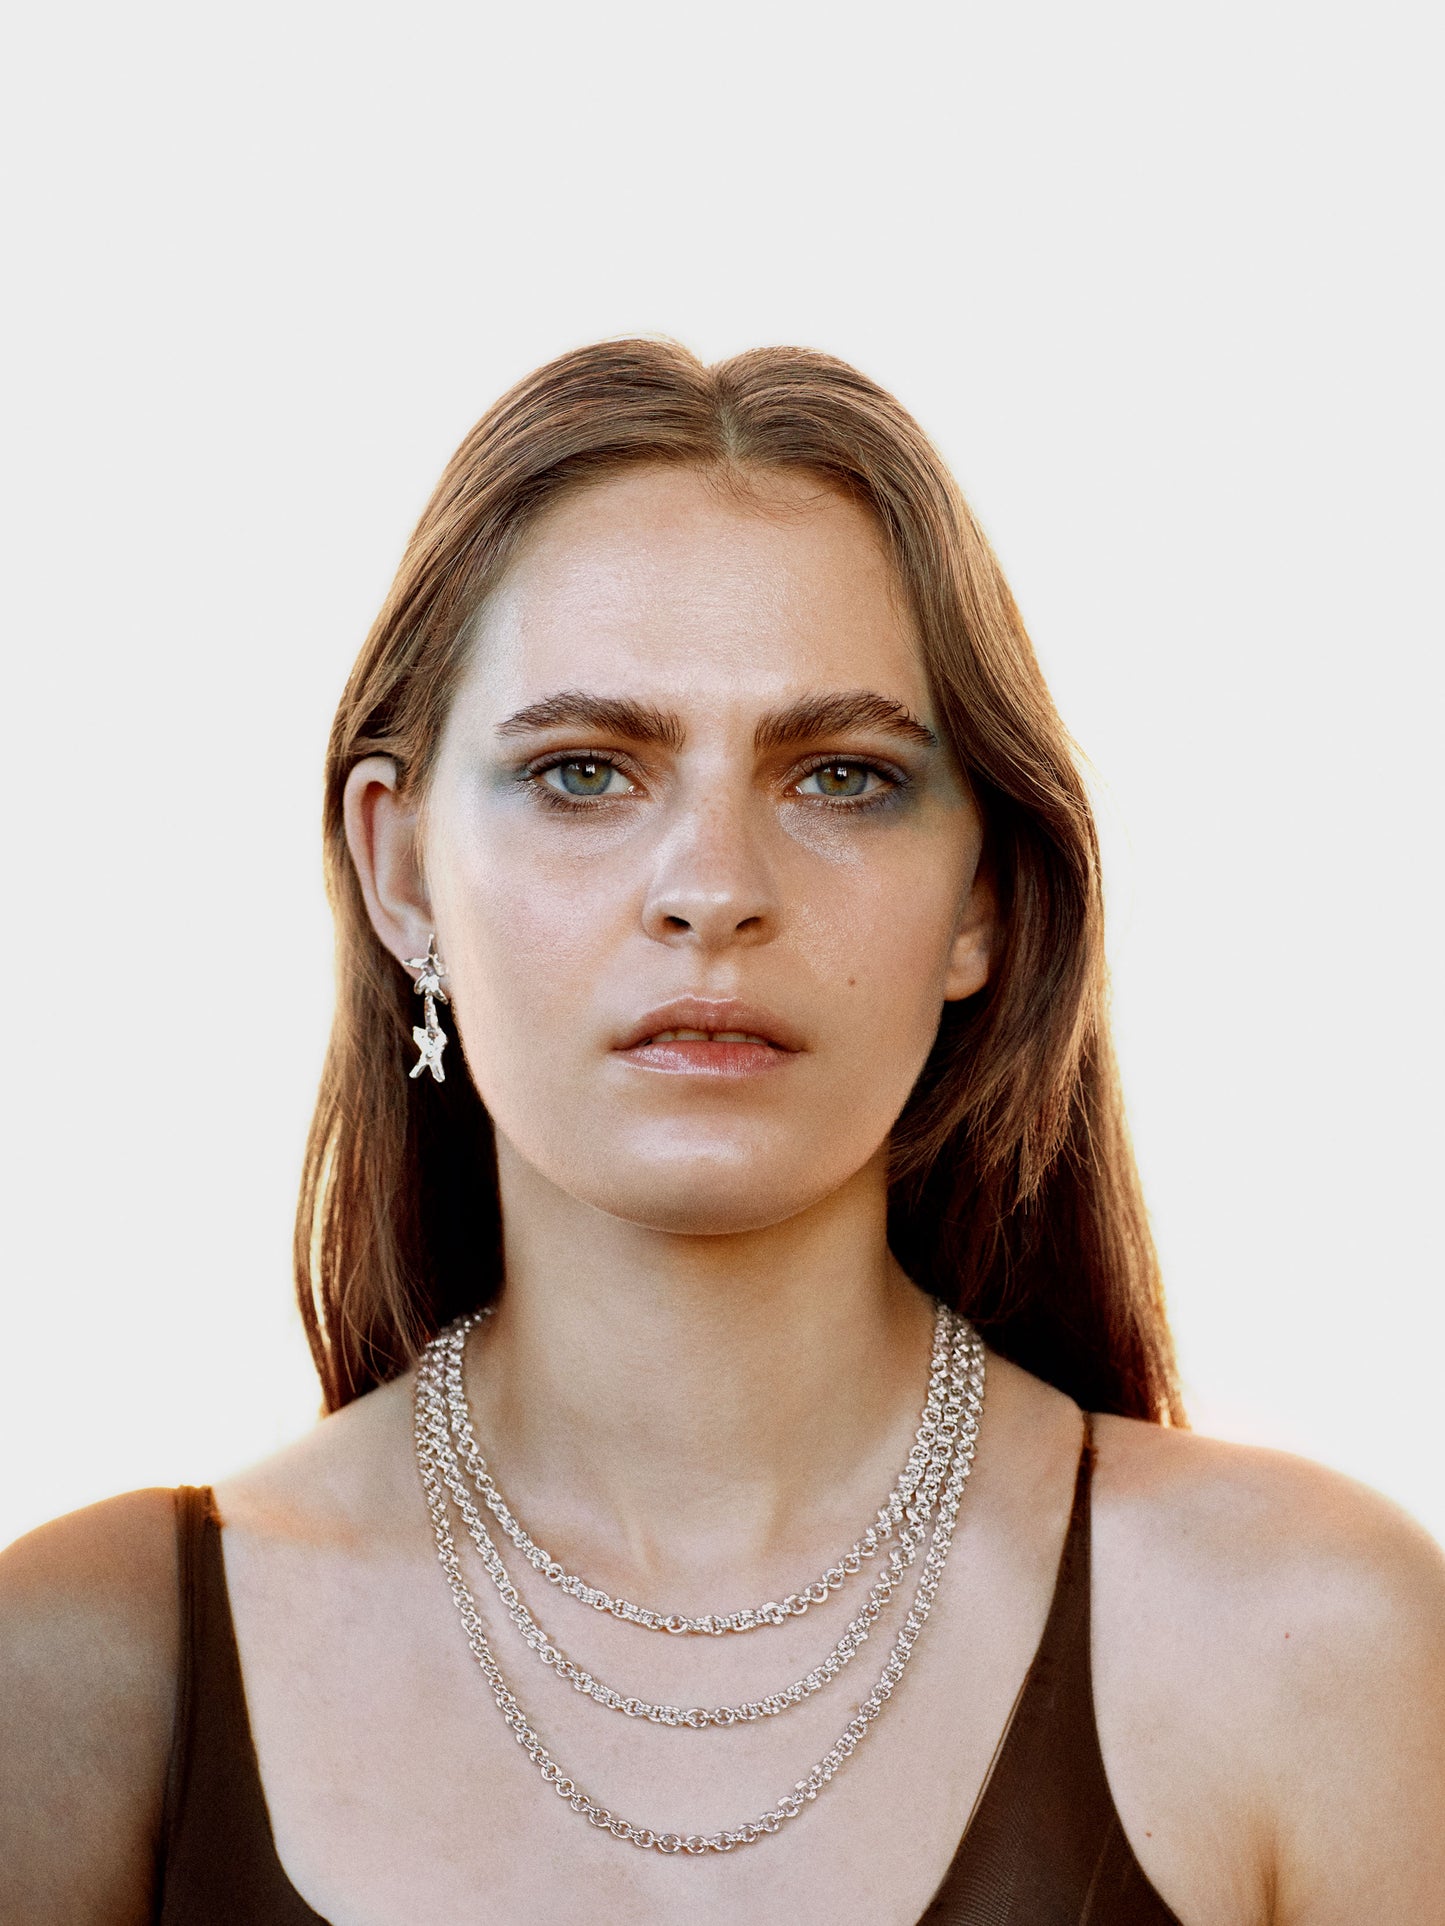 Coming Age Dawn collection campagne image of model wearing LIGHT necklace and BIOME earrings